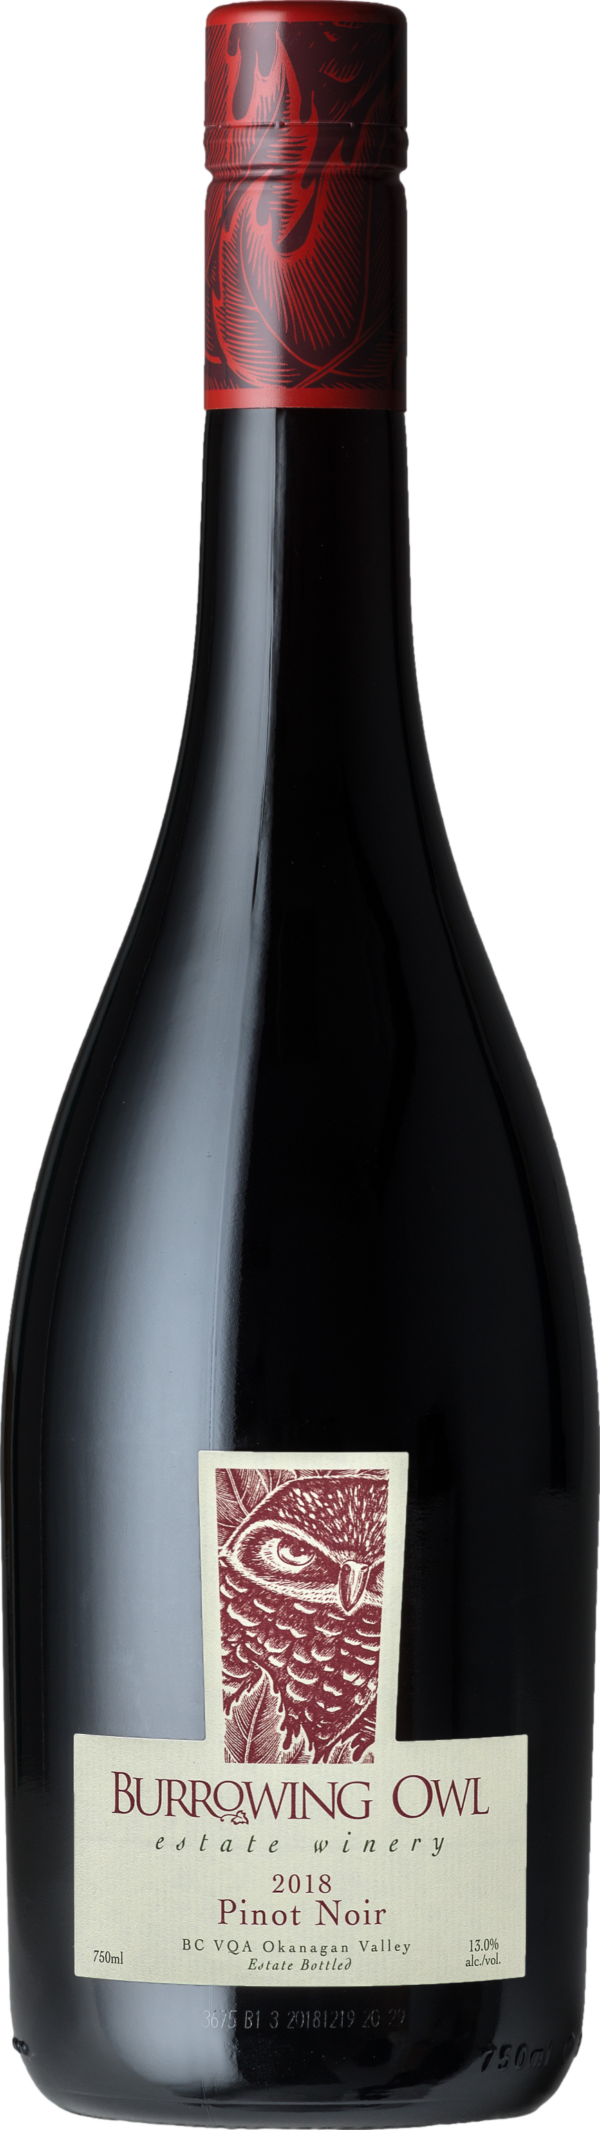 Product image of Burrowing Owl Pinot Noir 2018 from 8wines